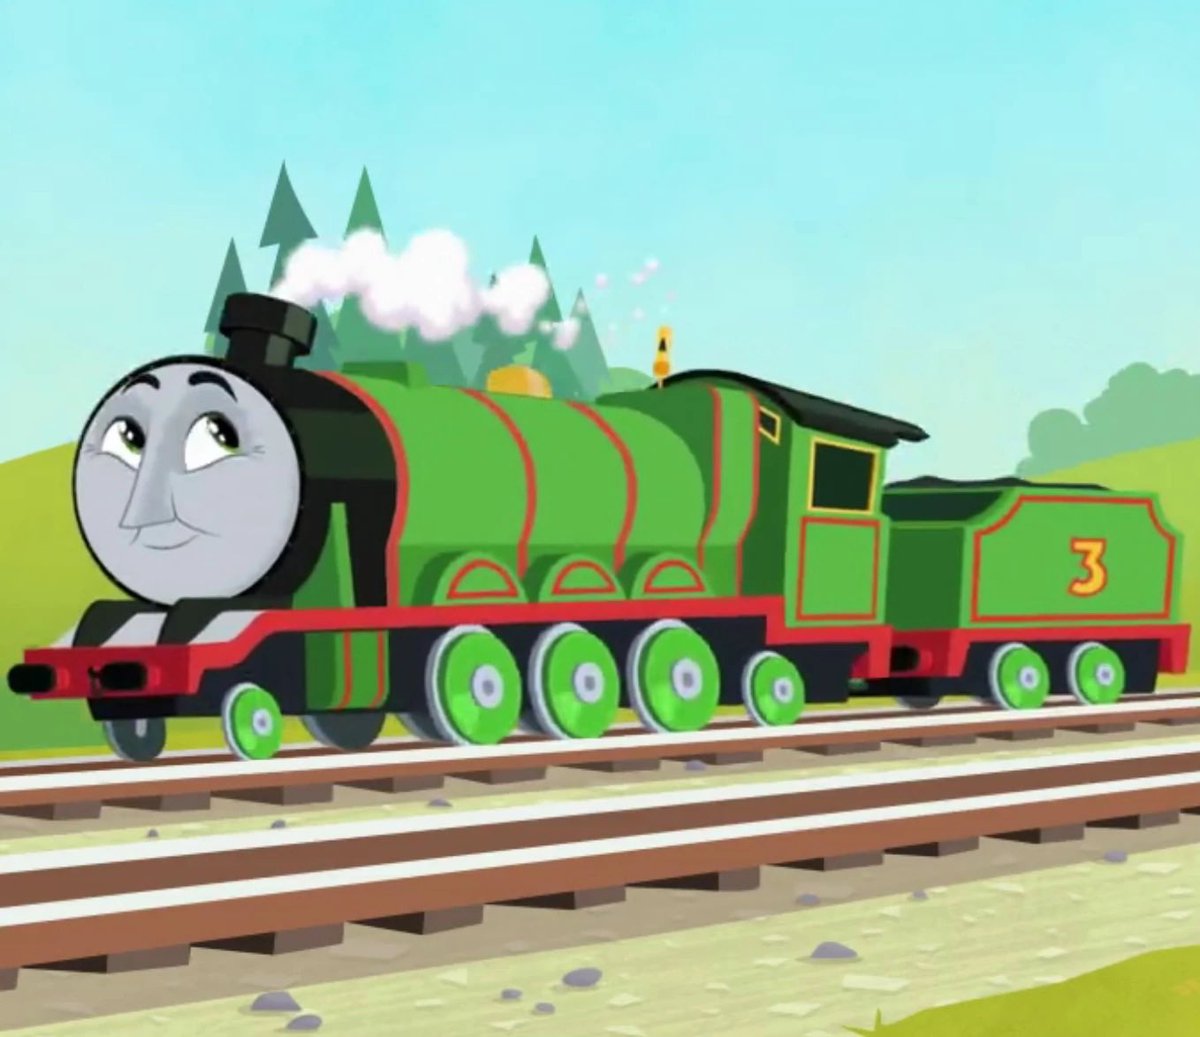 When Are Edward And Henry Going To Get Speaking Roles In All Engines go